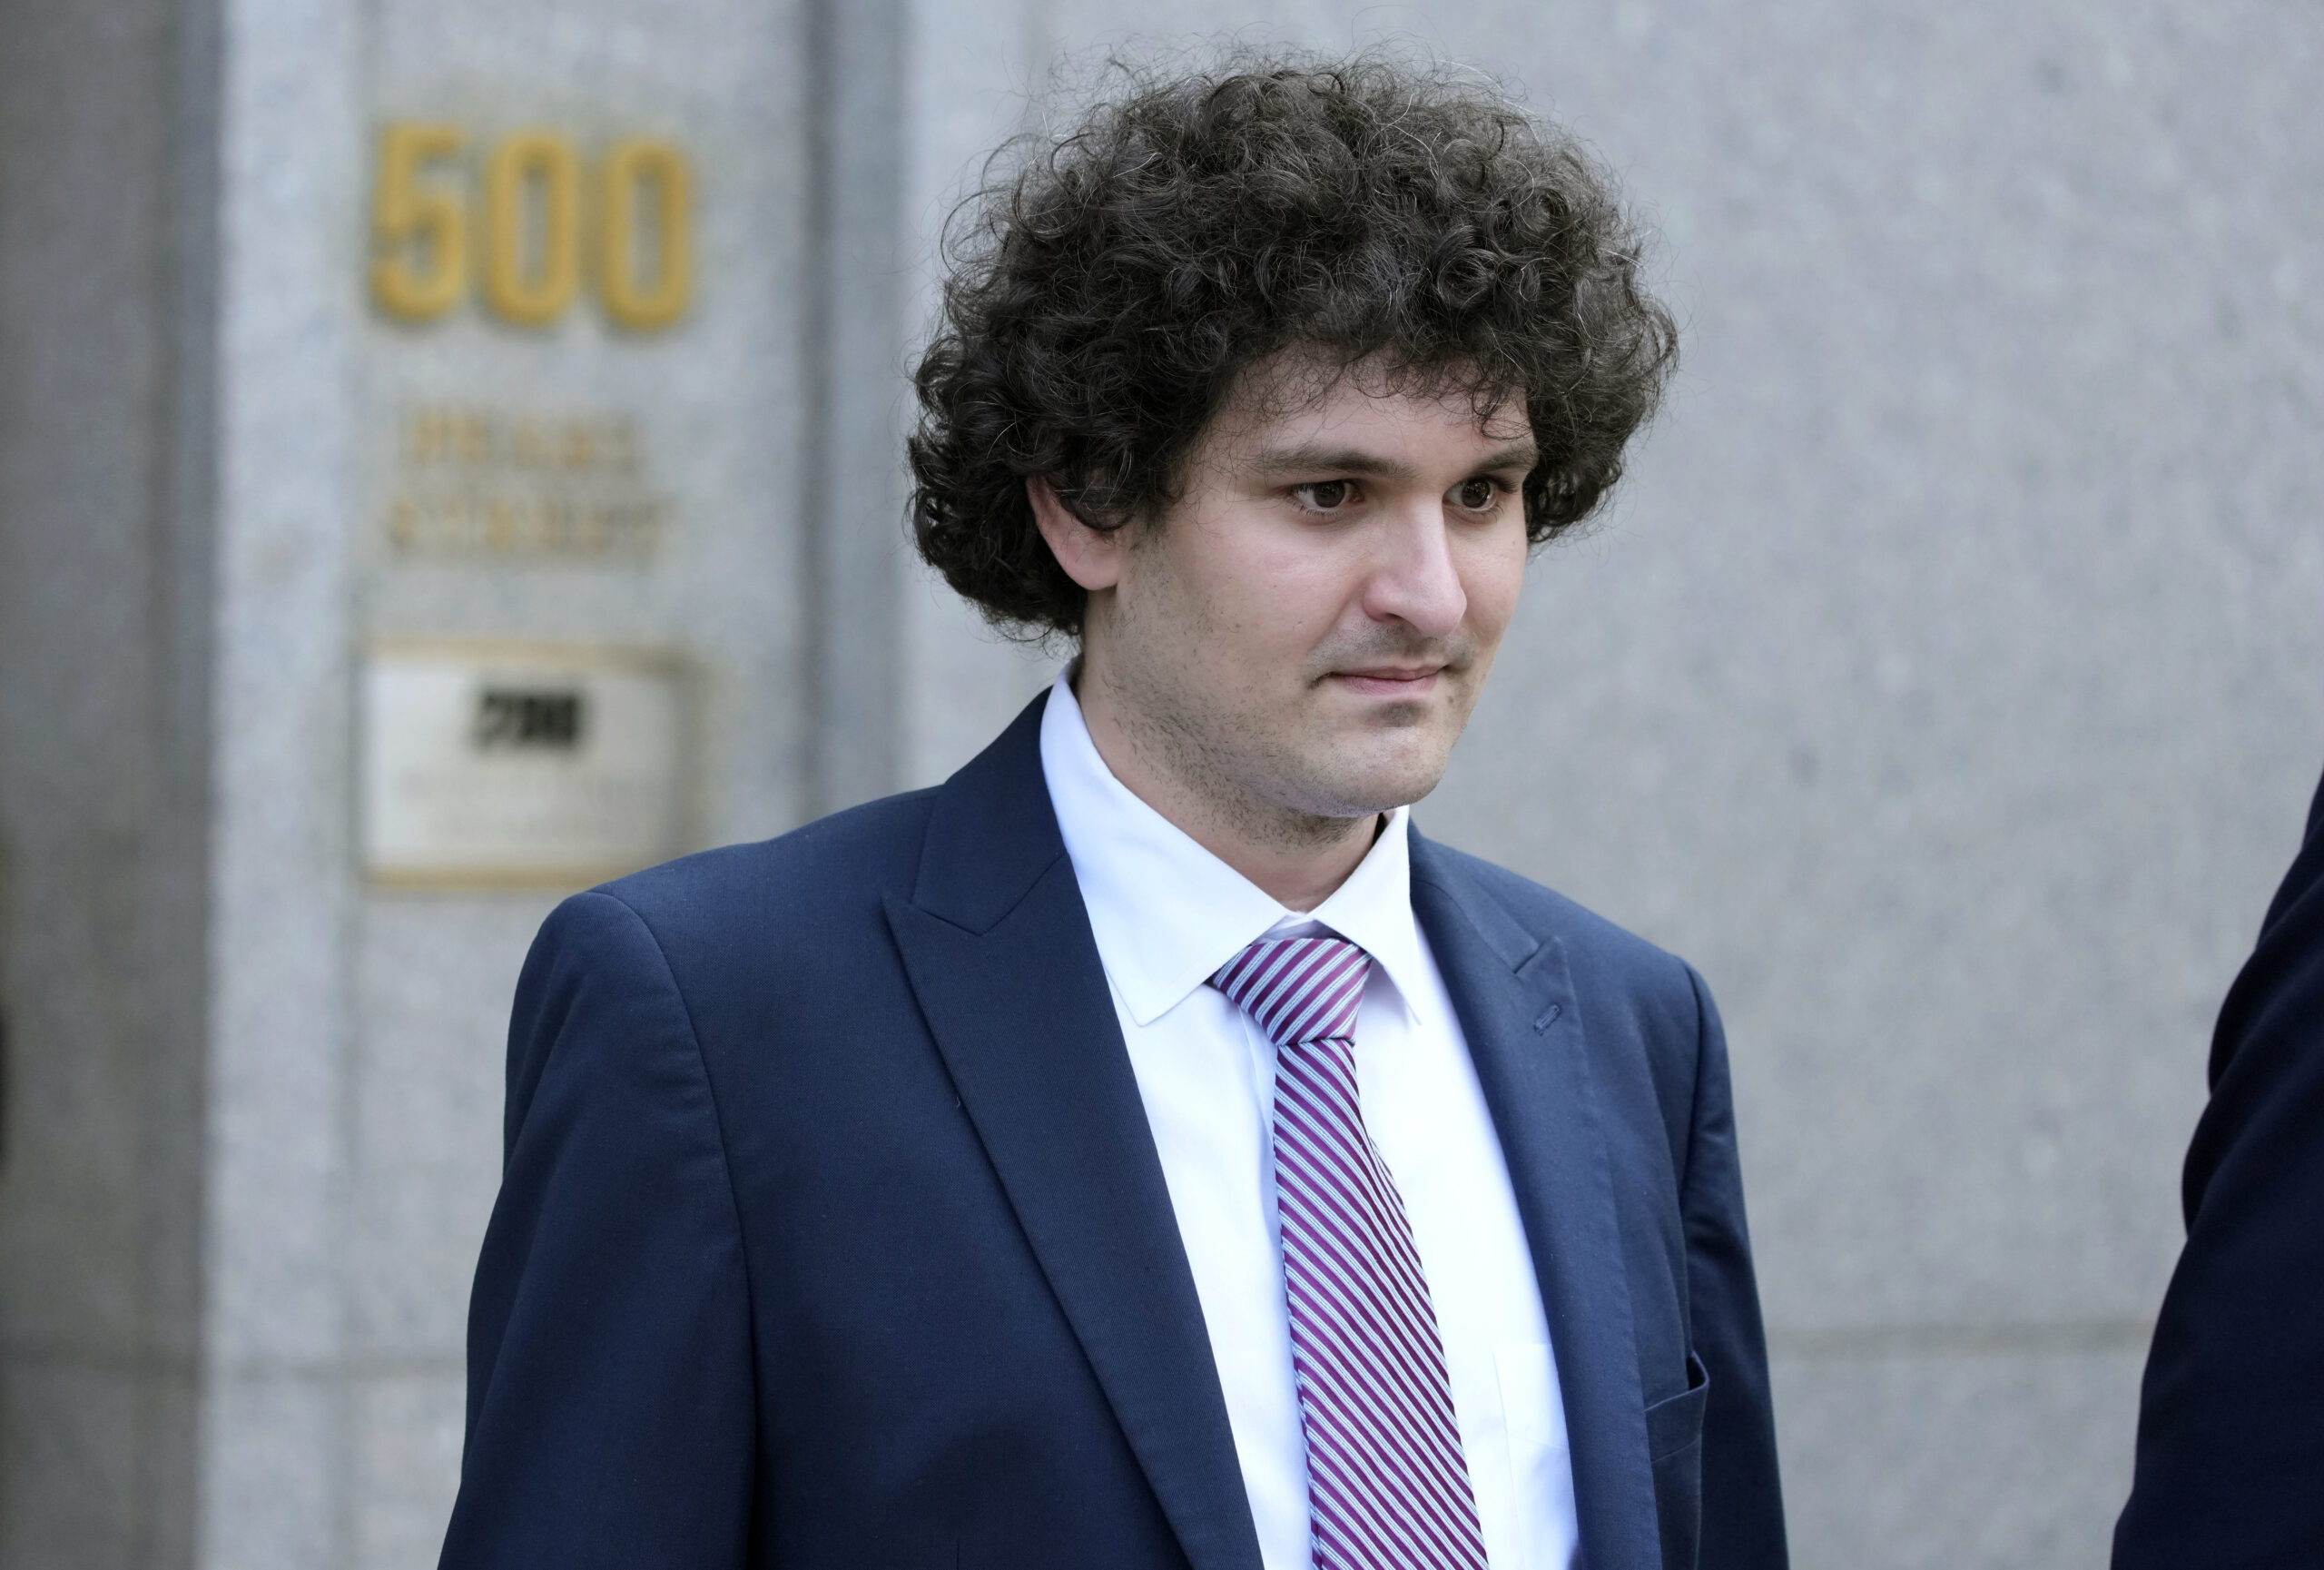 Crypto King Sam Bankman-Fried Sentenced To 25 Years In Prison For Massive Fraud